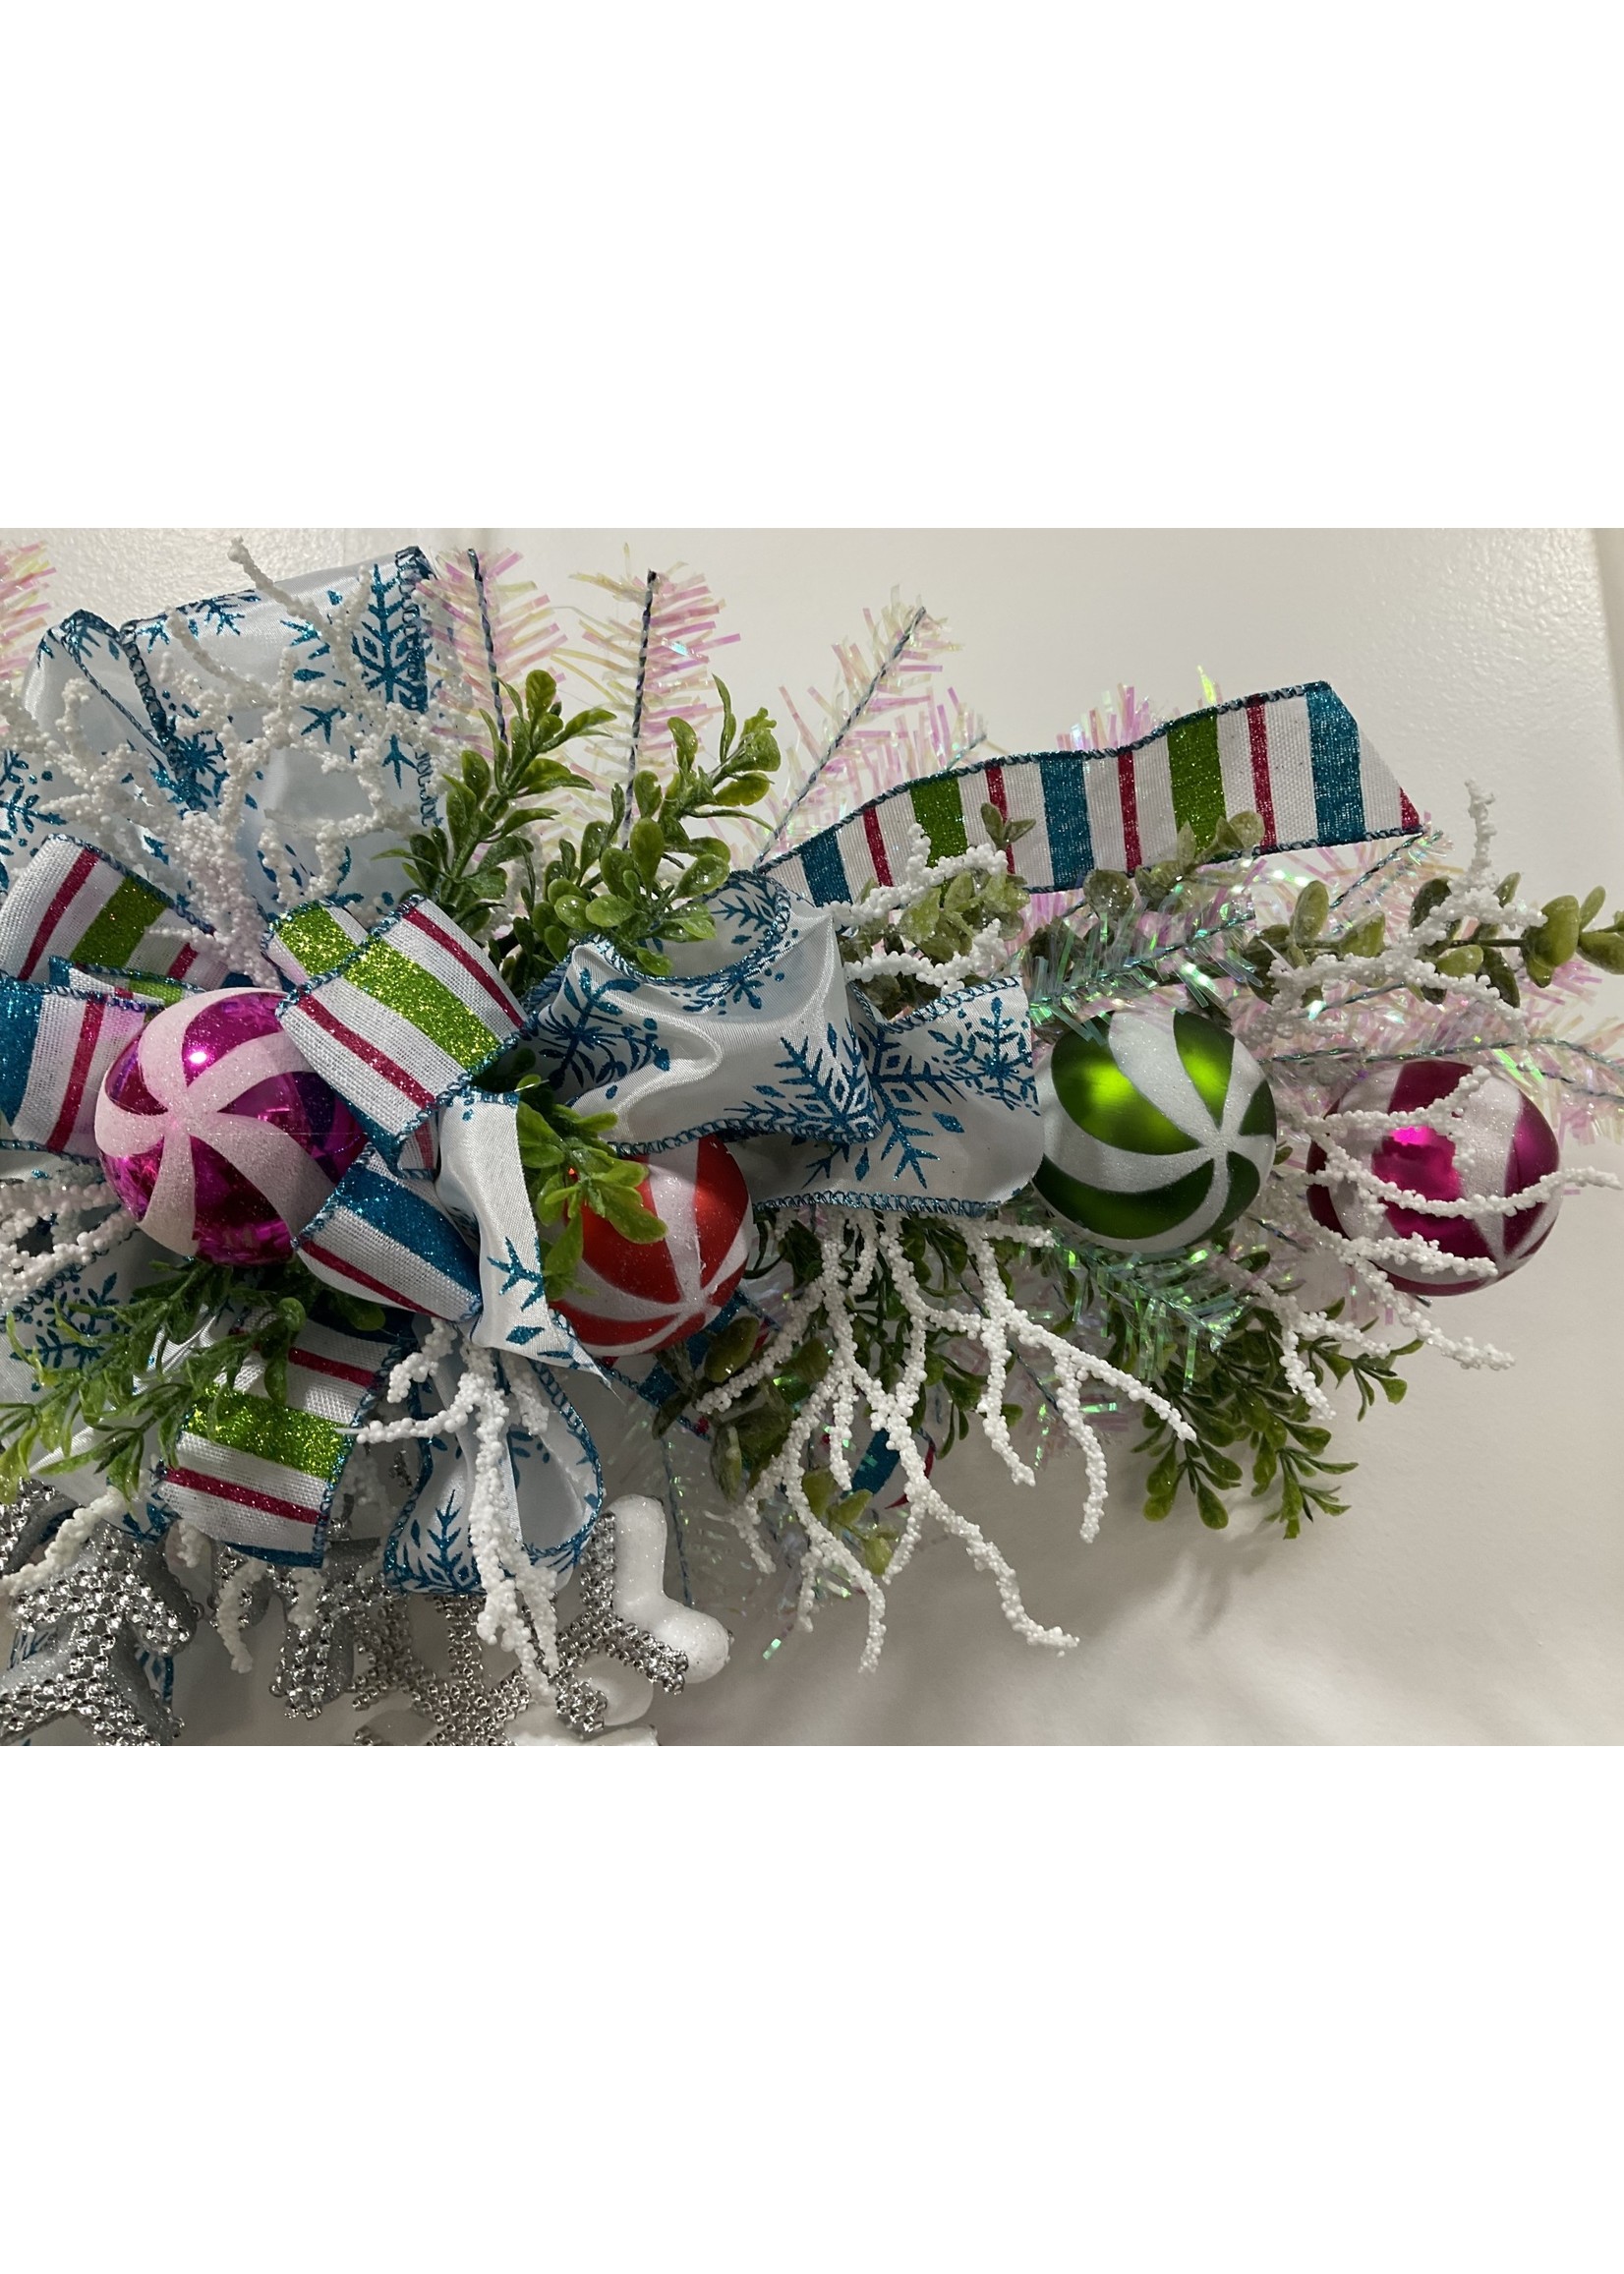 My New Favorite Thing Swag Boxwood White with Pastel Striped Ornaments, Snowflakes and Striped Ribbon H6"xW28"x13" 